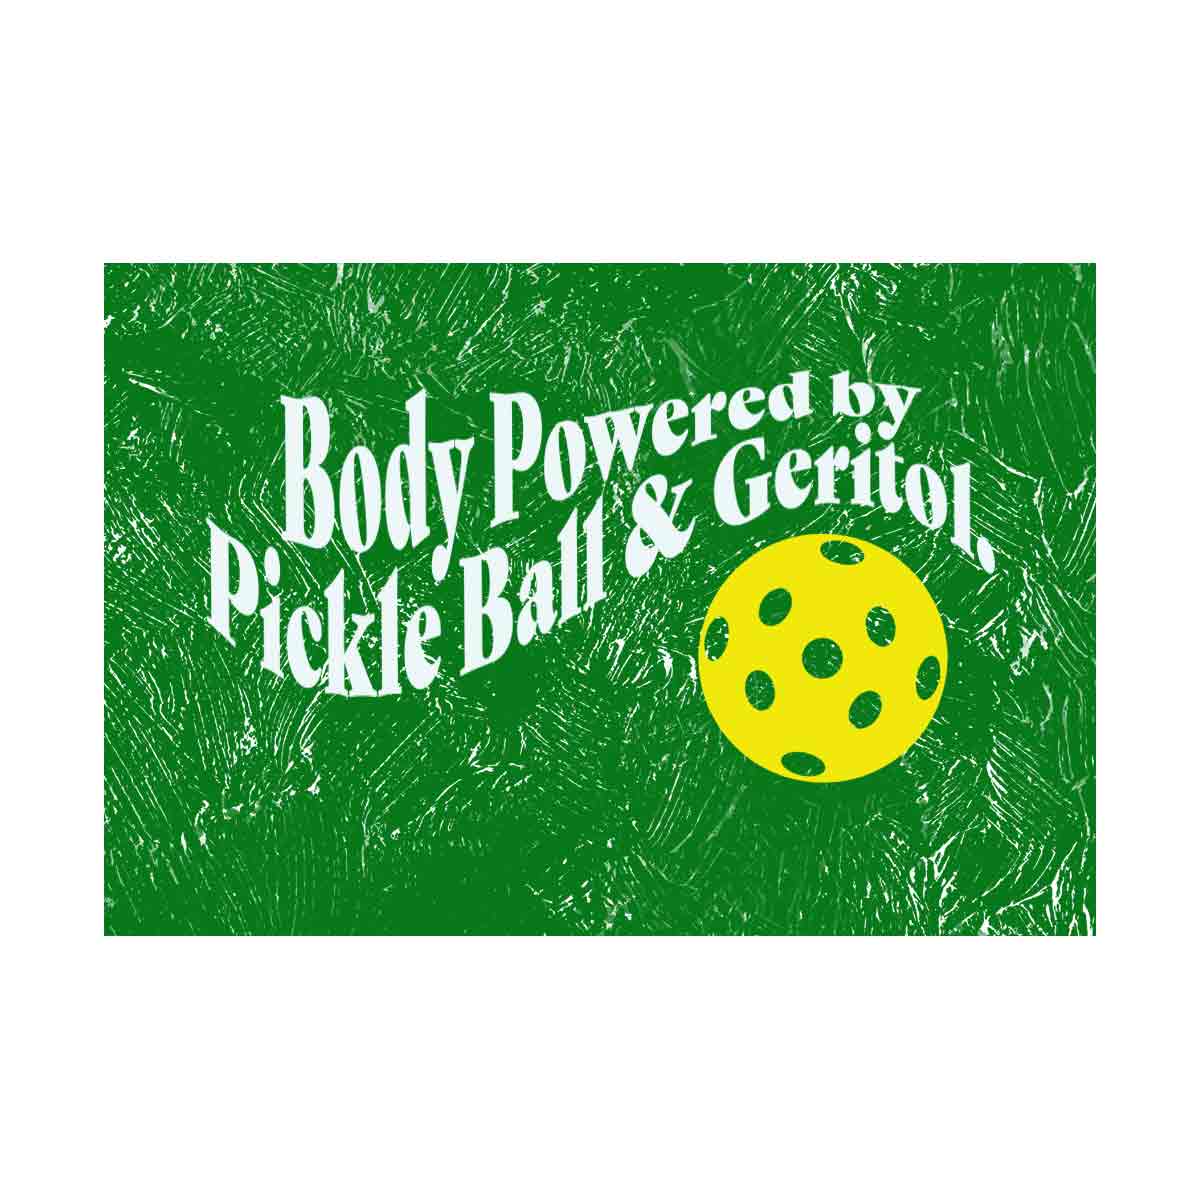 Body Powered by Pickle Ball